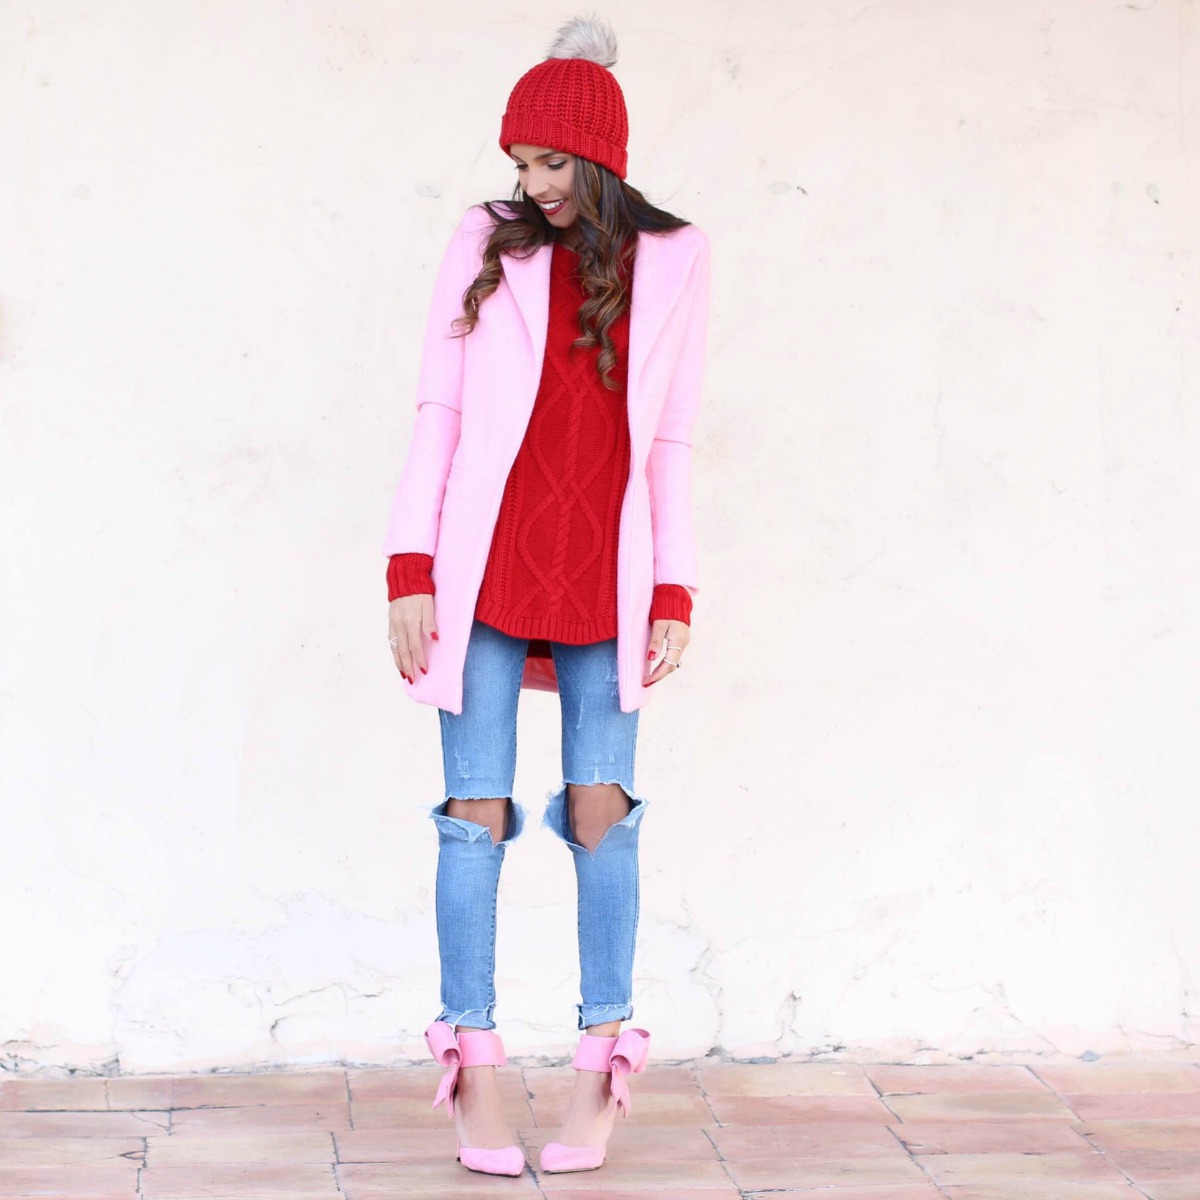 Casual Red and Pink Valentine's Day Outfit